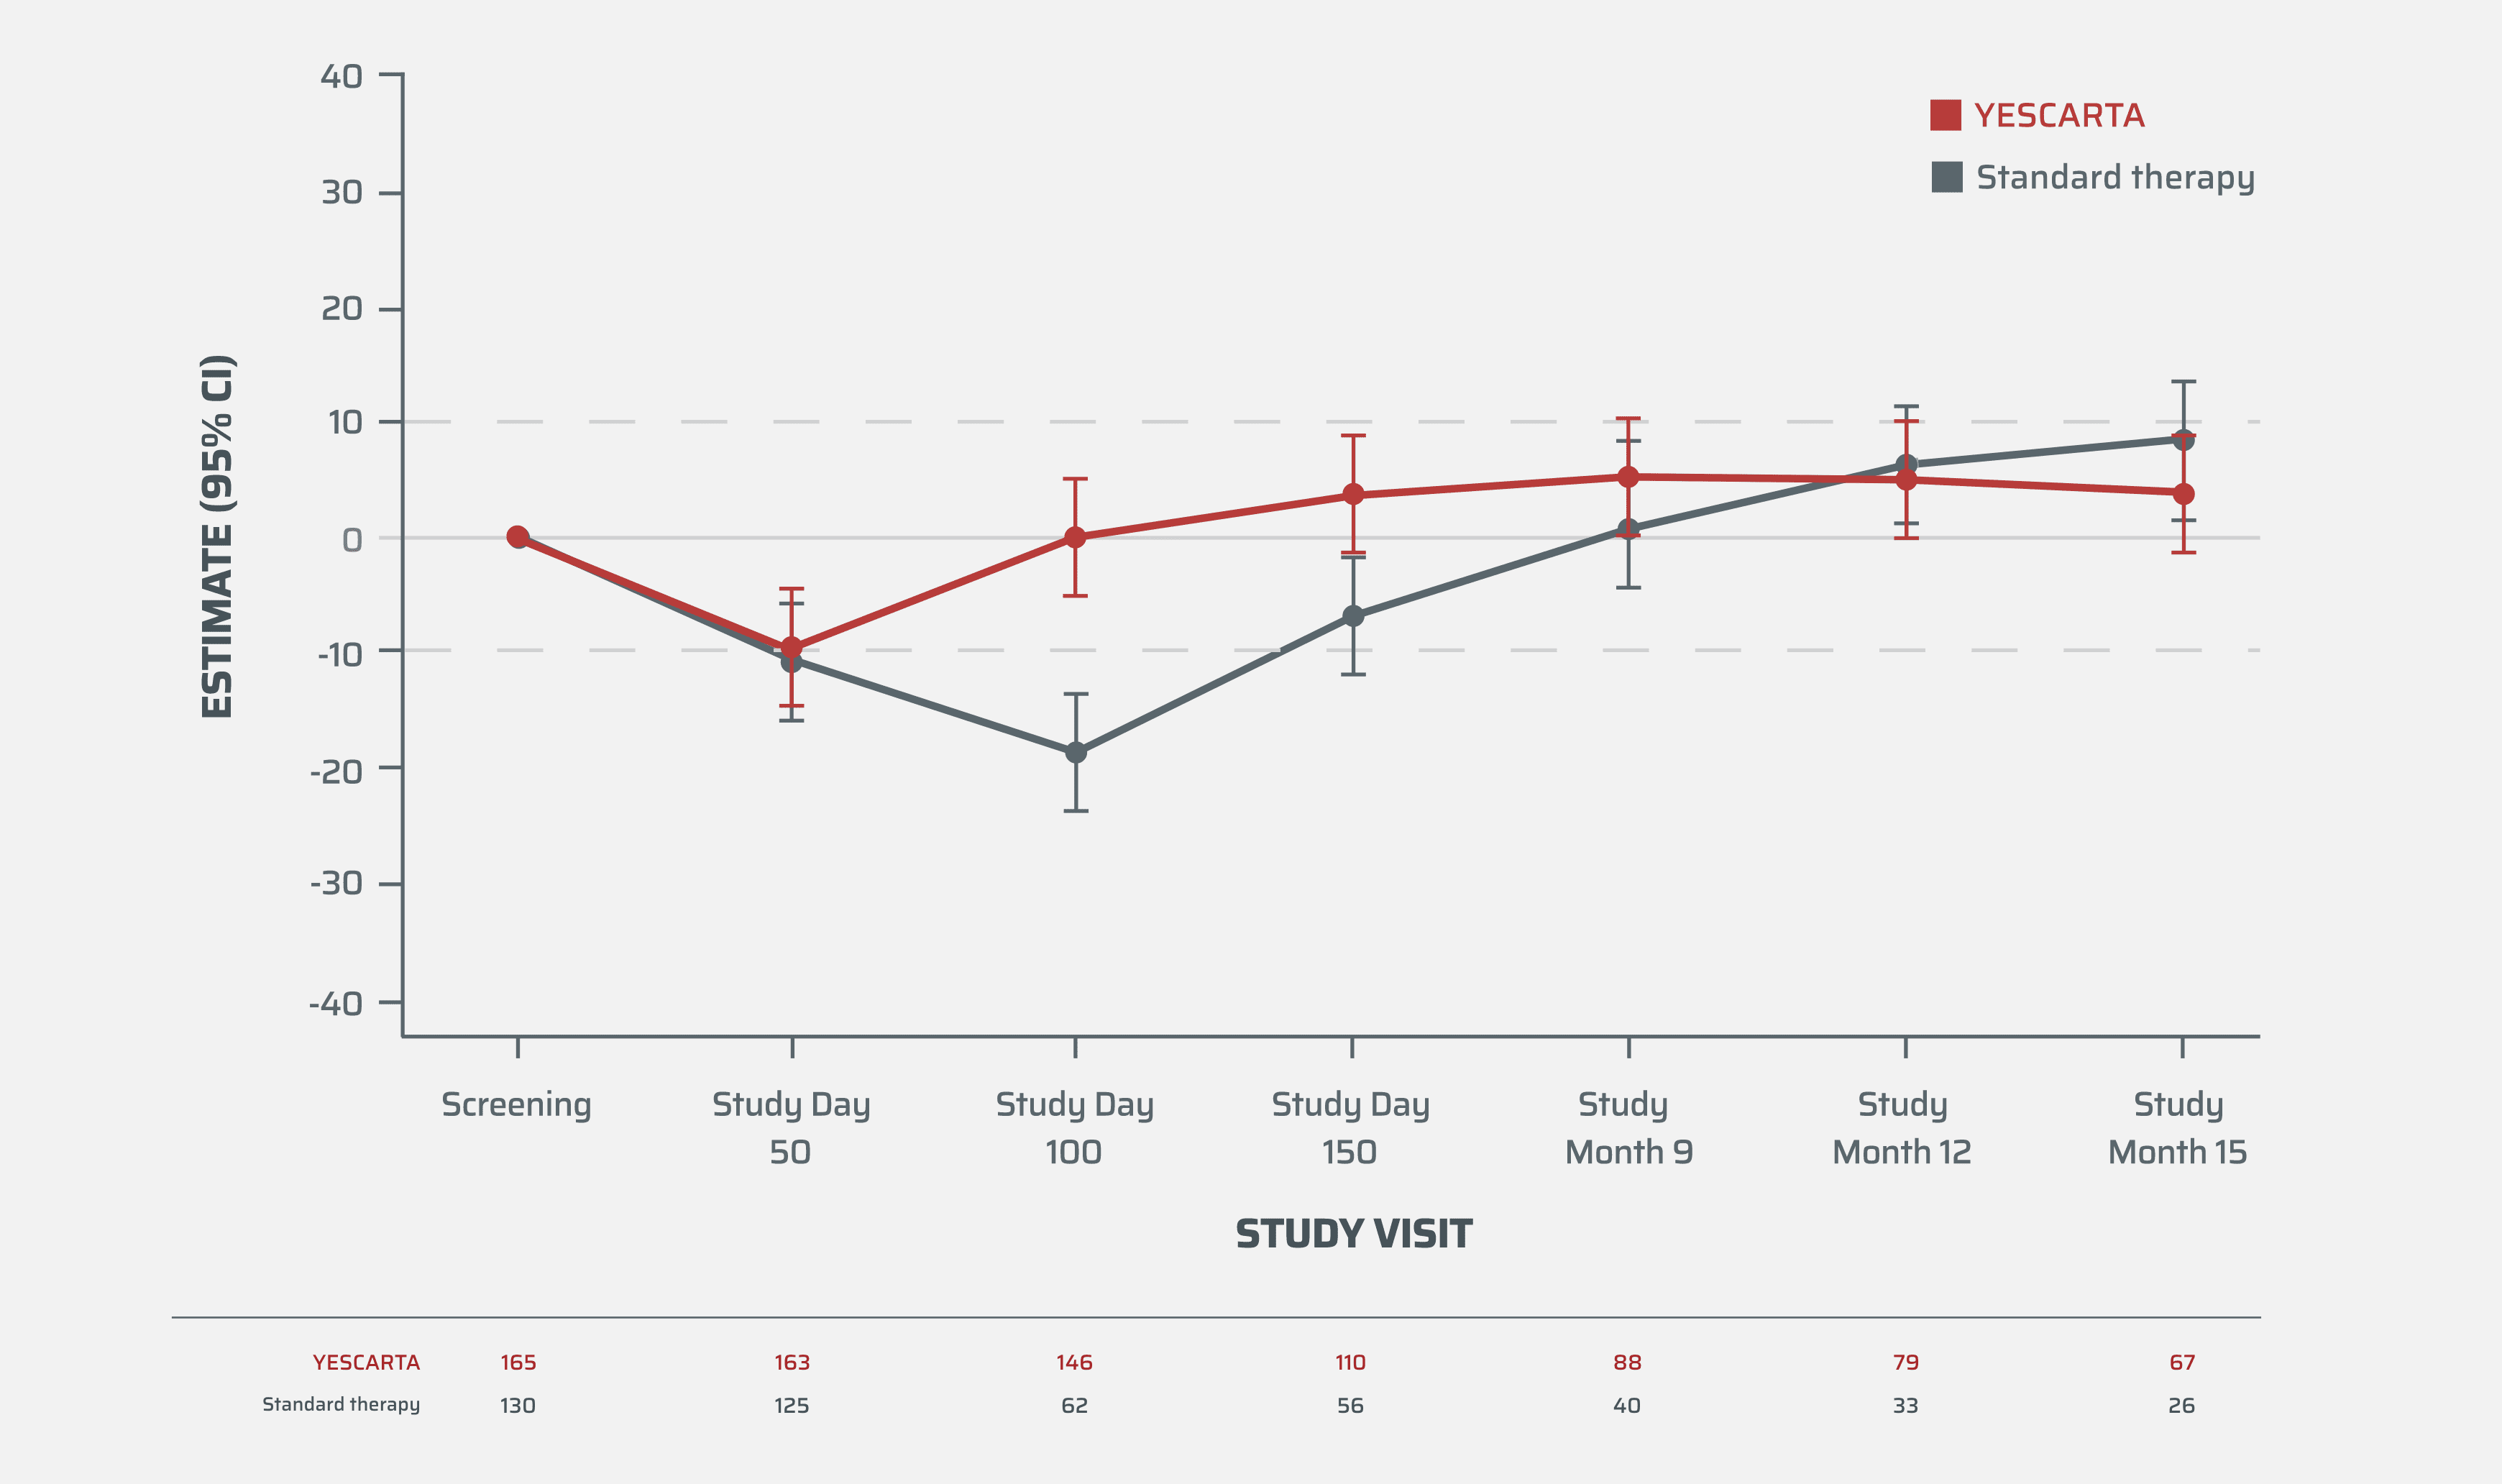 Line chart showing change from screening by visit in EORTC QLQ-C30 Global Health Status/HRQoL score.